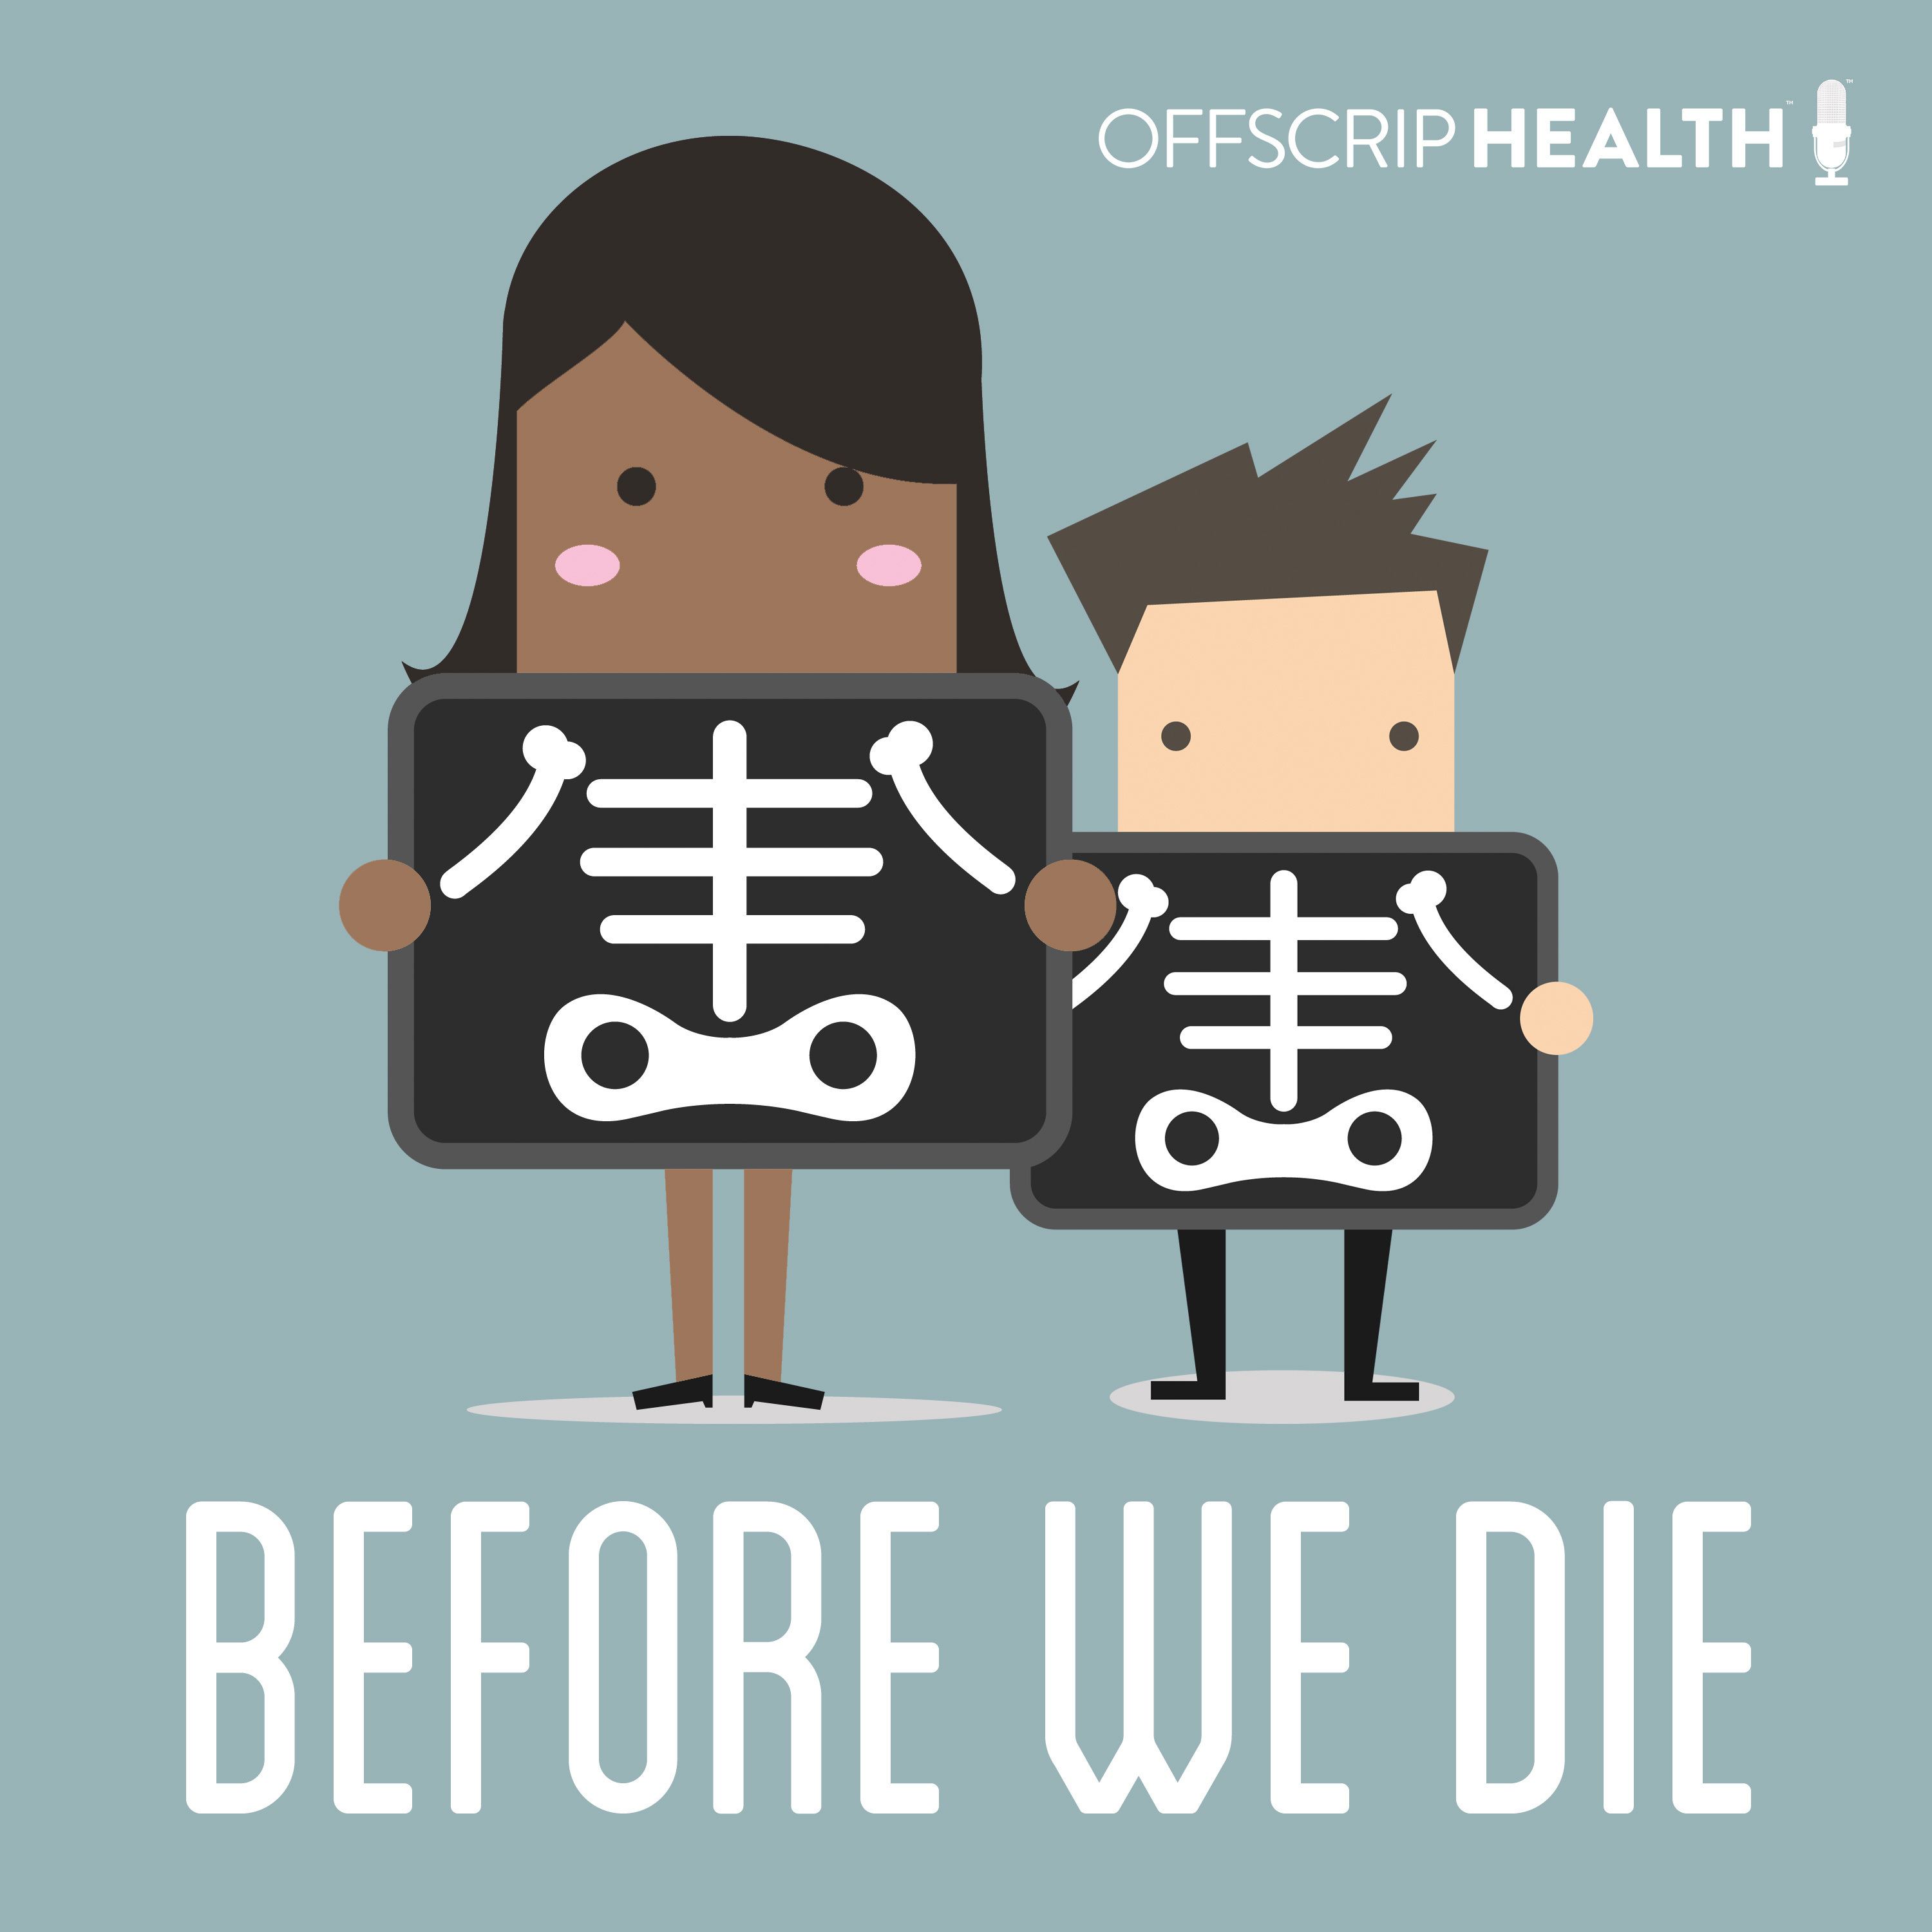 Introducing the ”Before We Die” Podcast from OffScrip Health